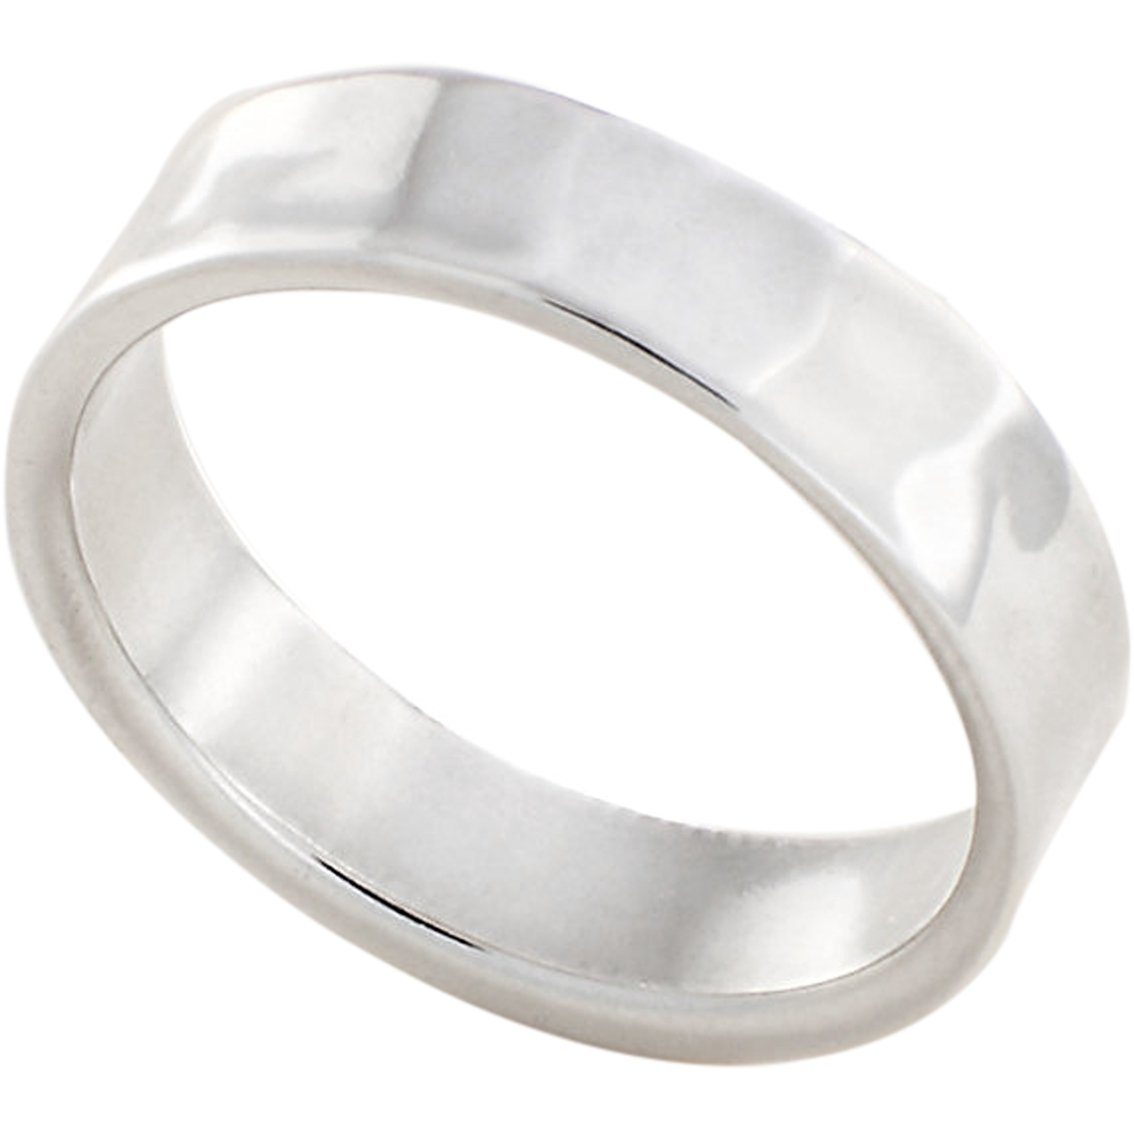 James Avery Hammered Band - Image 2 of 2